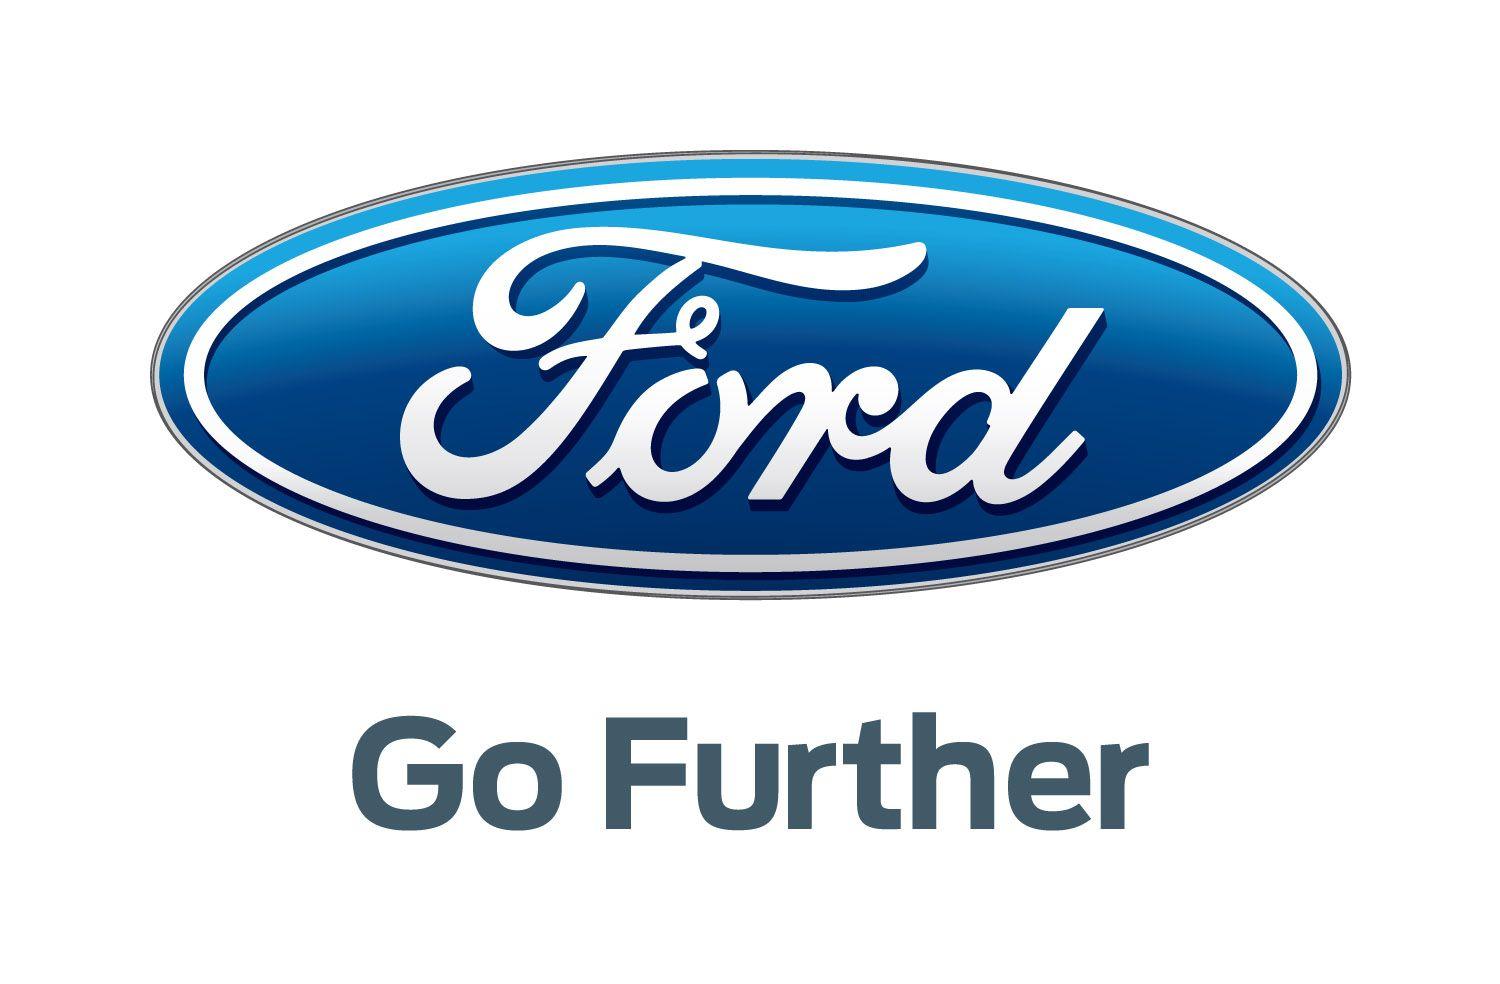 High Res Ford Logo - High Res Ford Wallpapers #806379 Wall